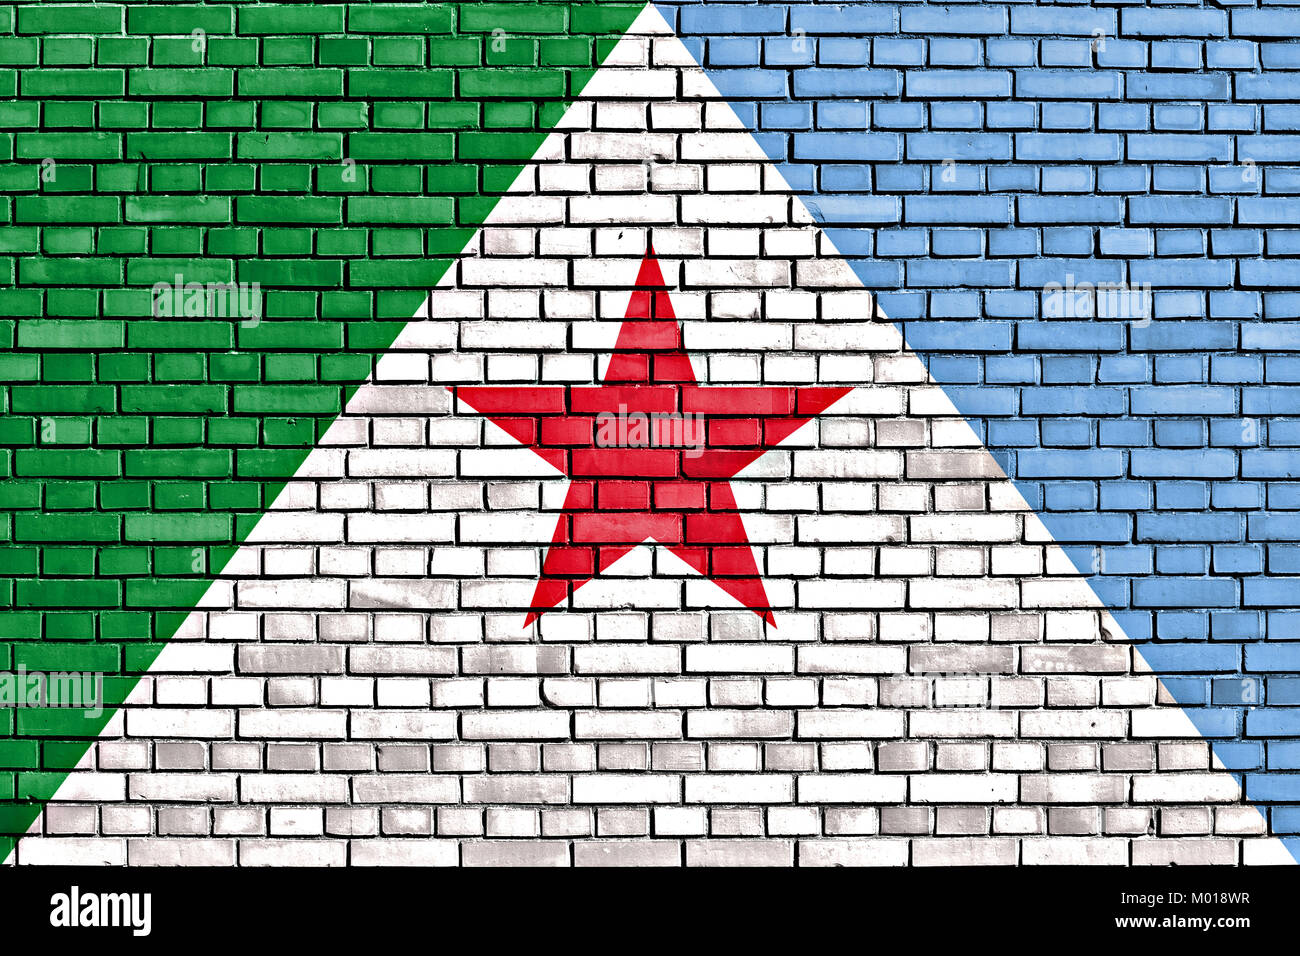 flag of Merida state painted on brick wall Stock Photo